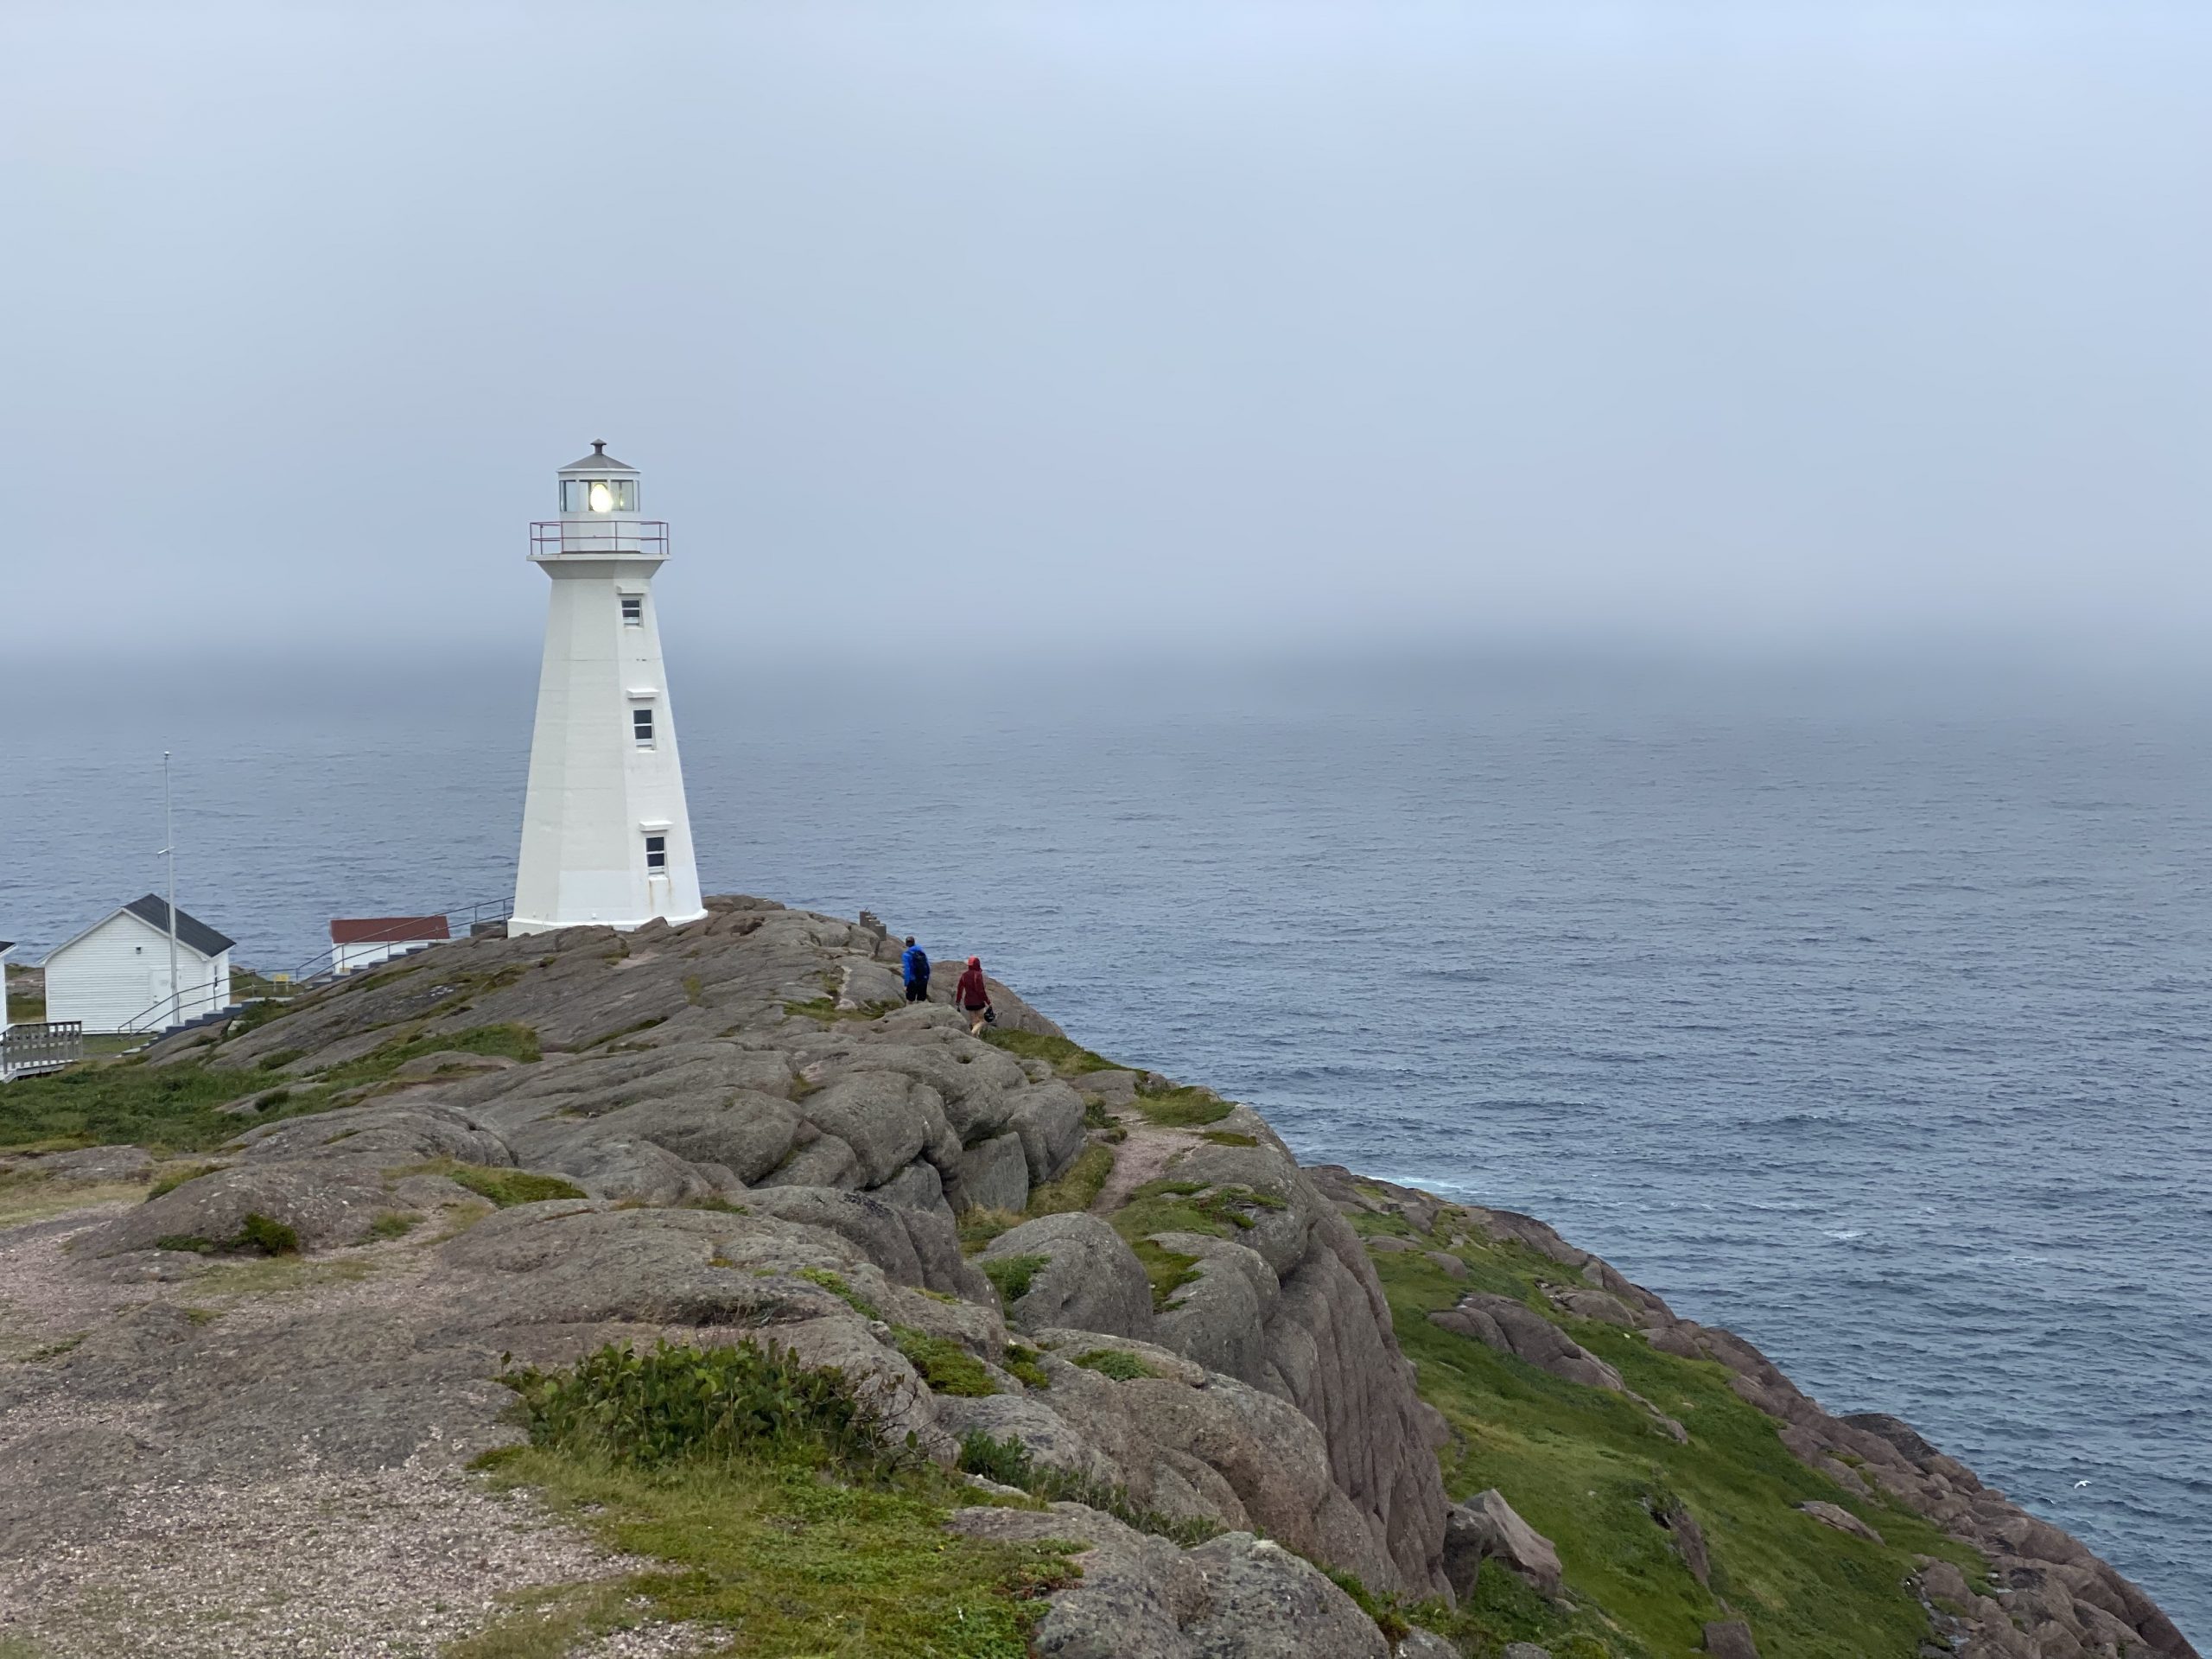 The Cape Spear lighthouse, as viewed from the old lighthouse site.